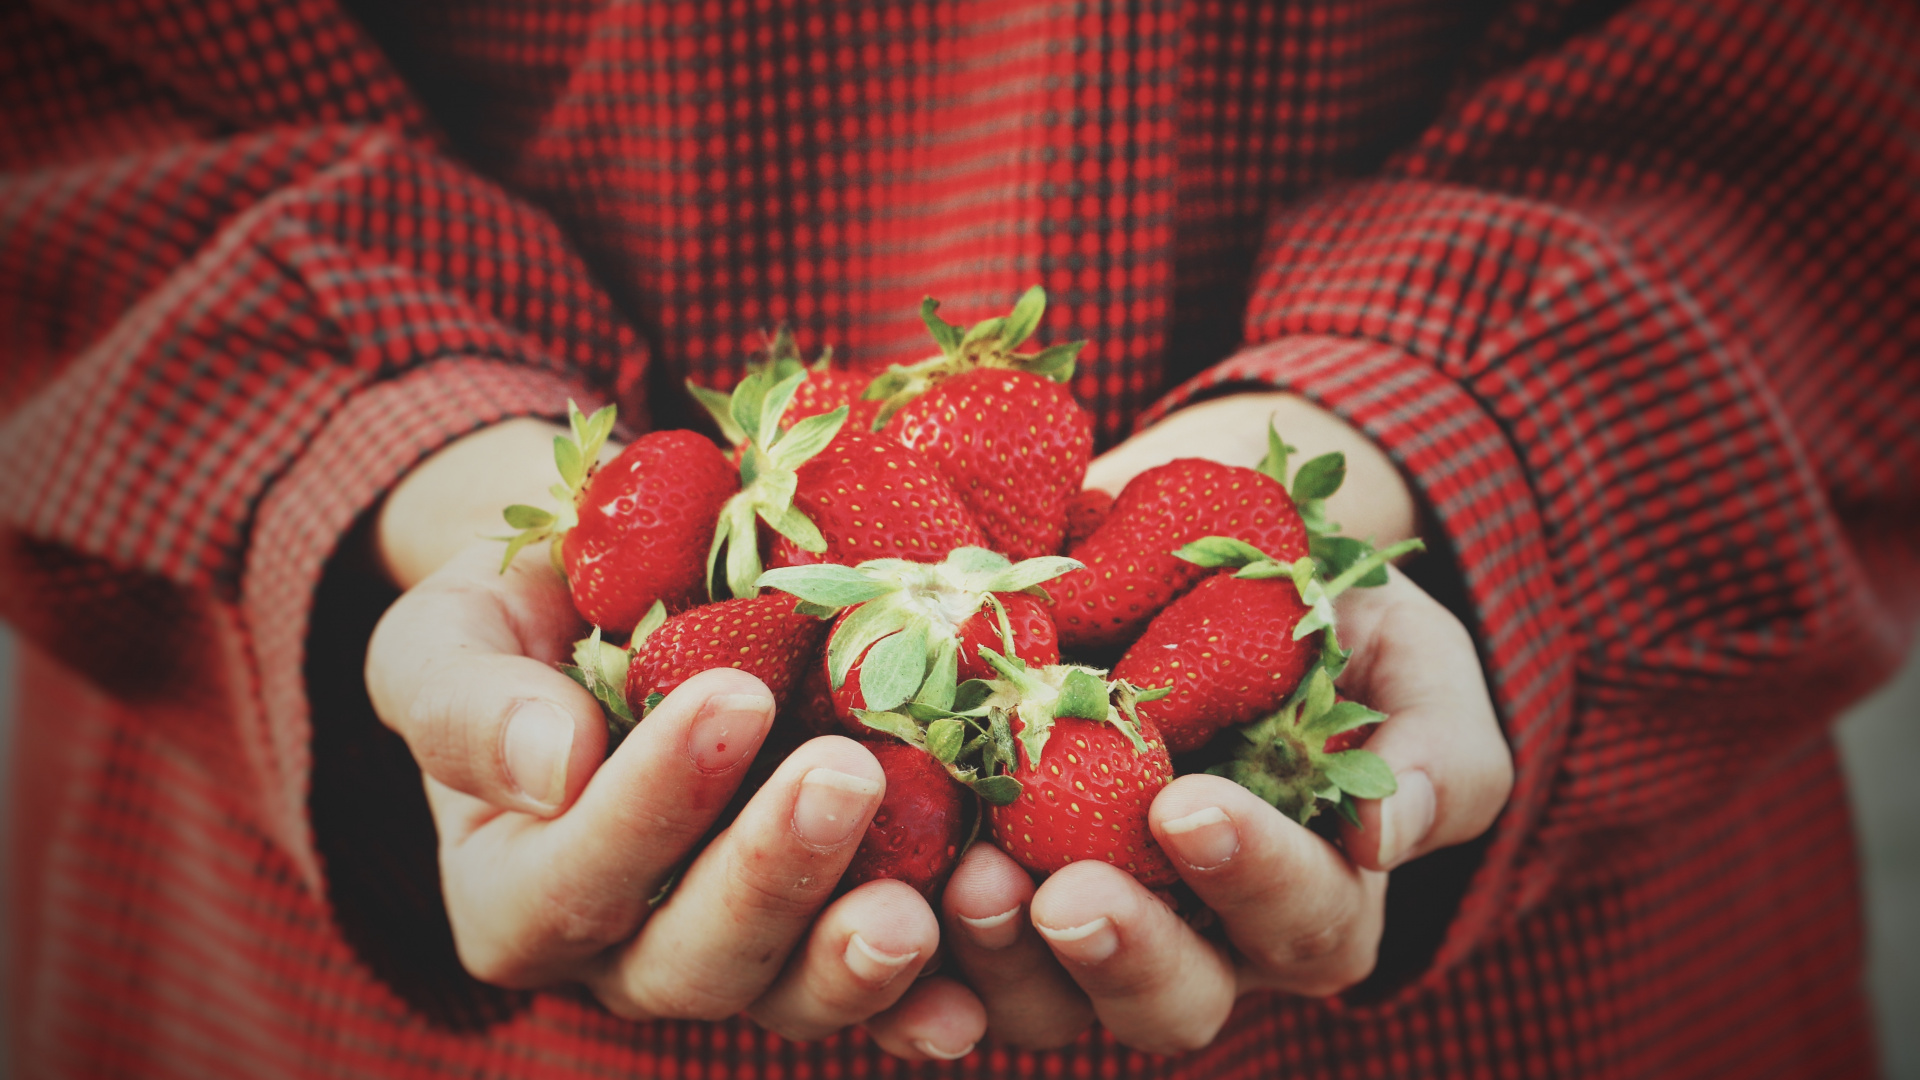 Person Holding Strawberries on Hand. Wallpaper in 1920x1080 Resolution